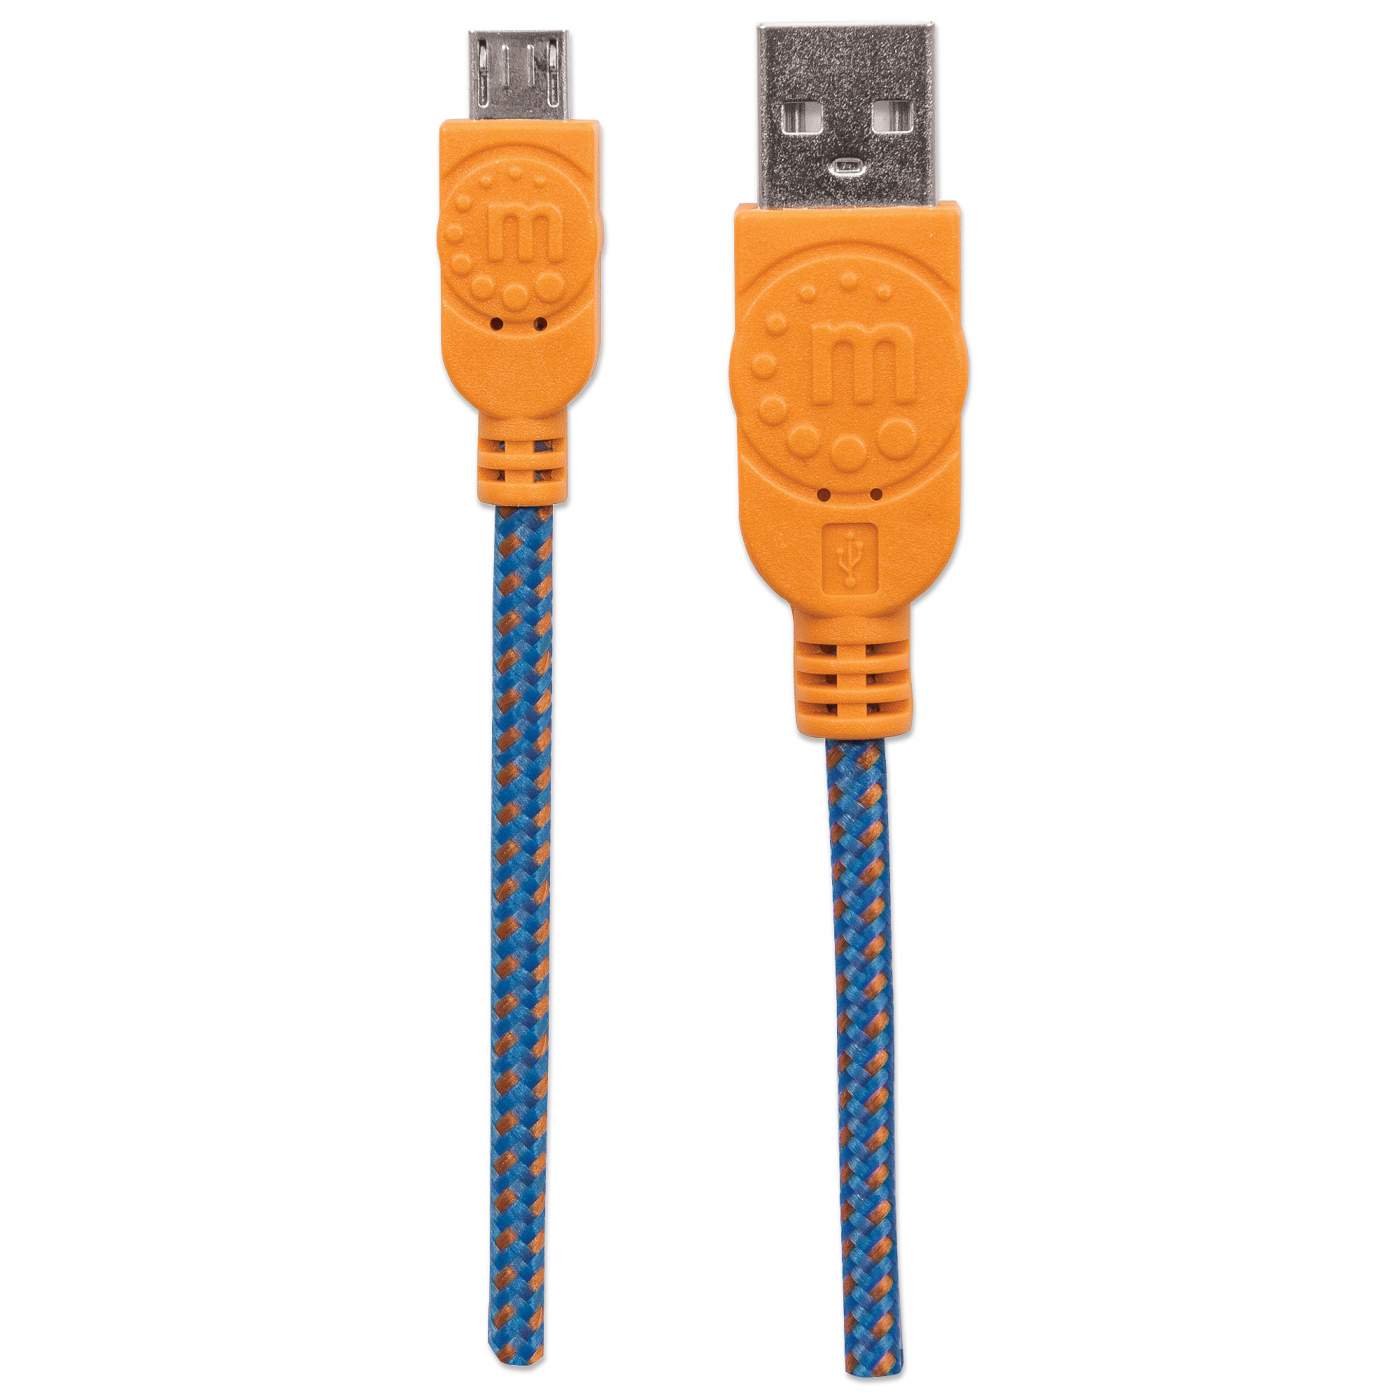 Braided Hi-Speed USB Micro-B Device Cable Image 5